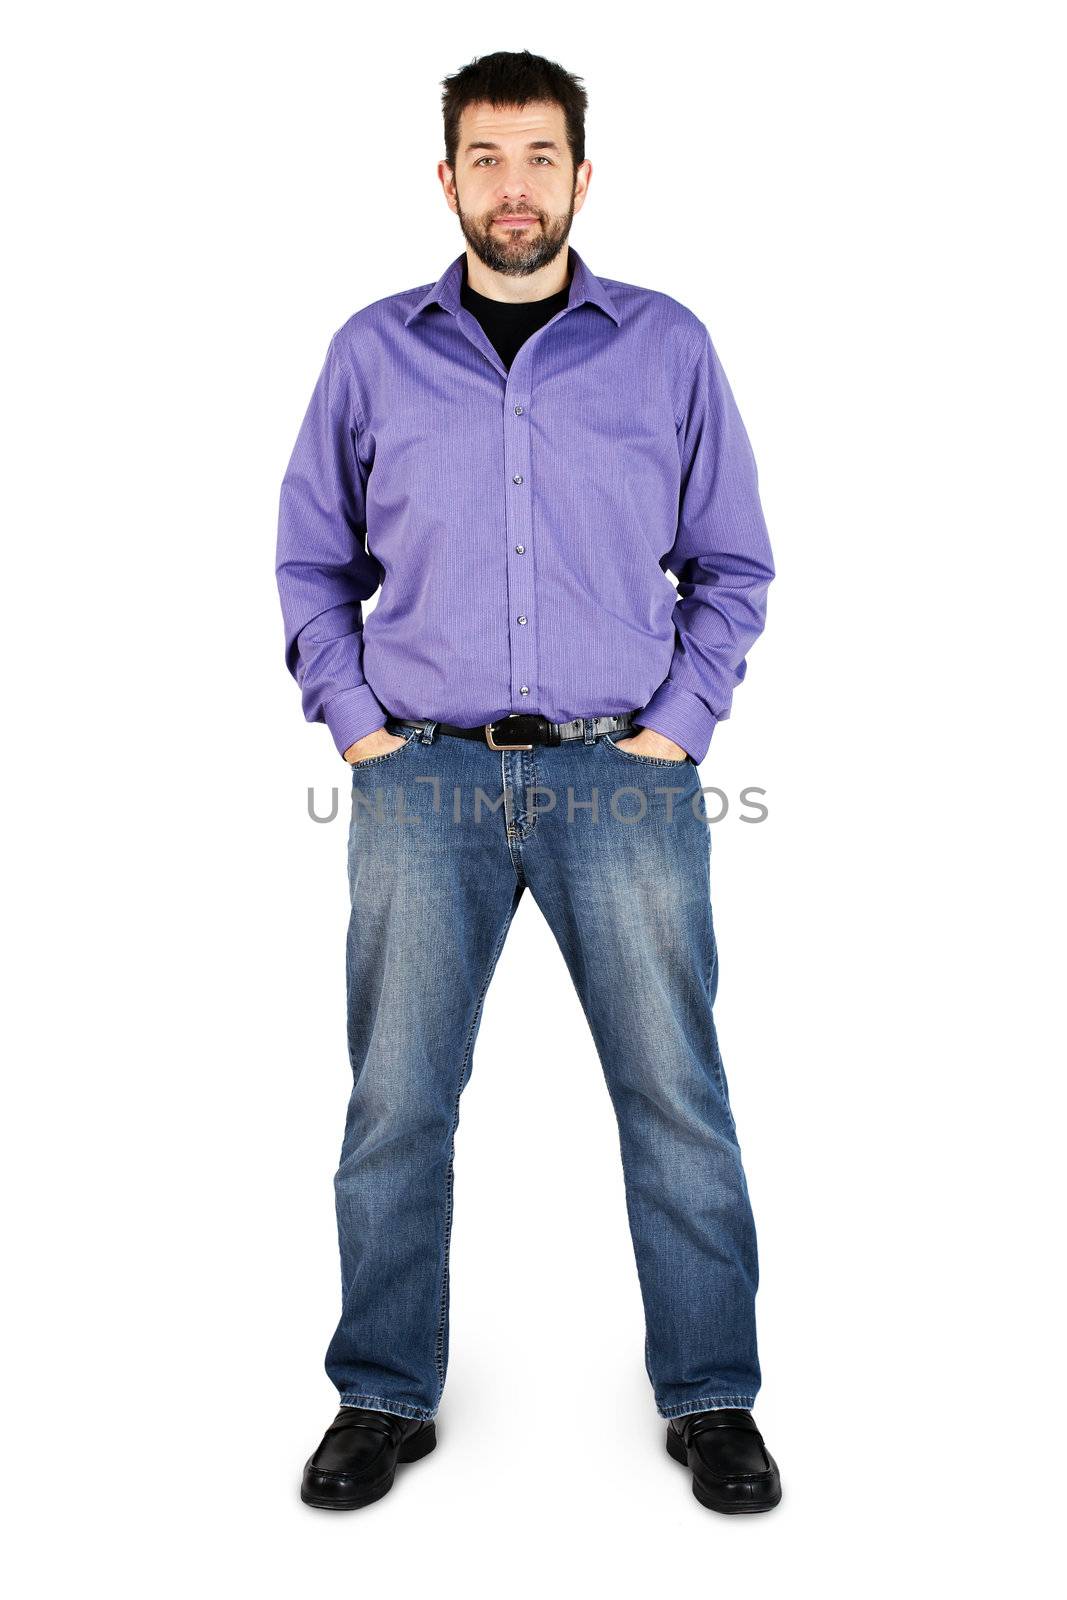 Complete body shot of a tall caucasian man in jeans over white